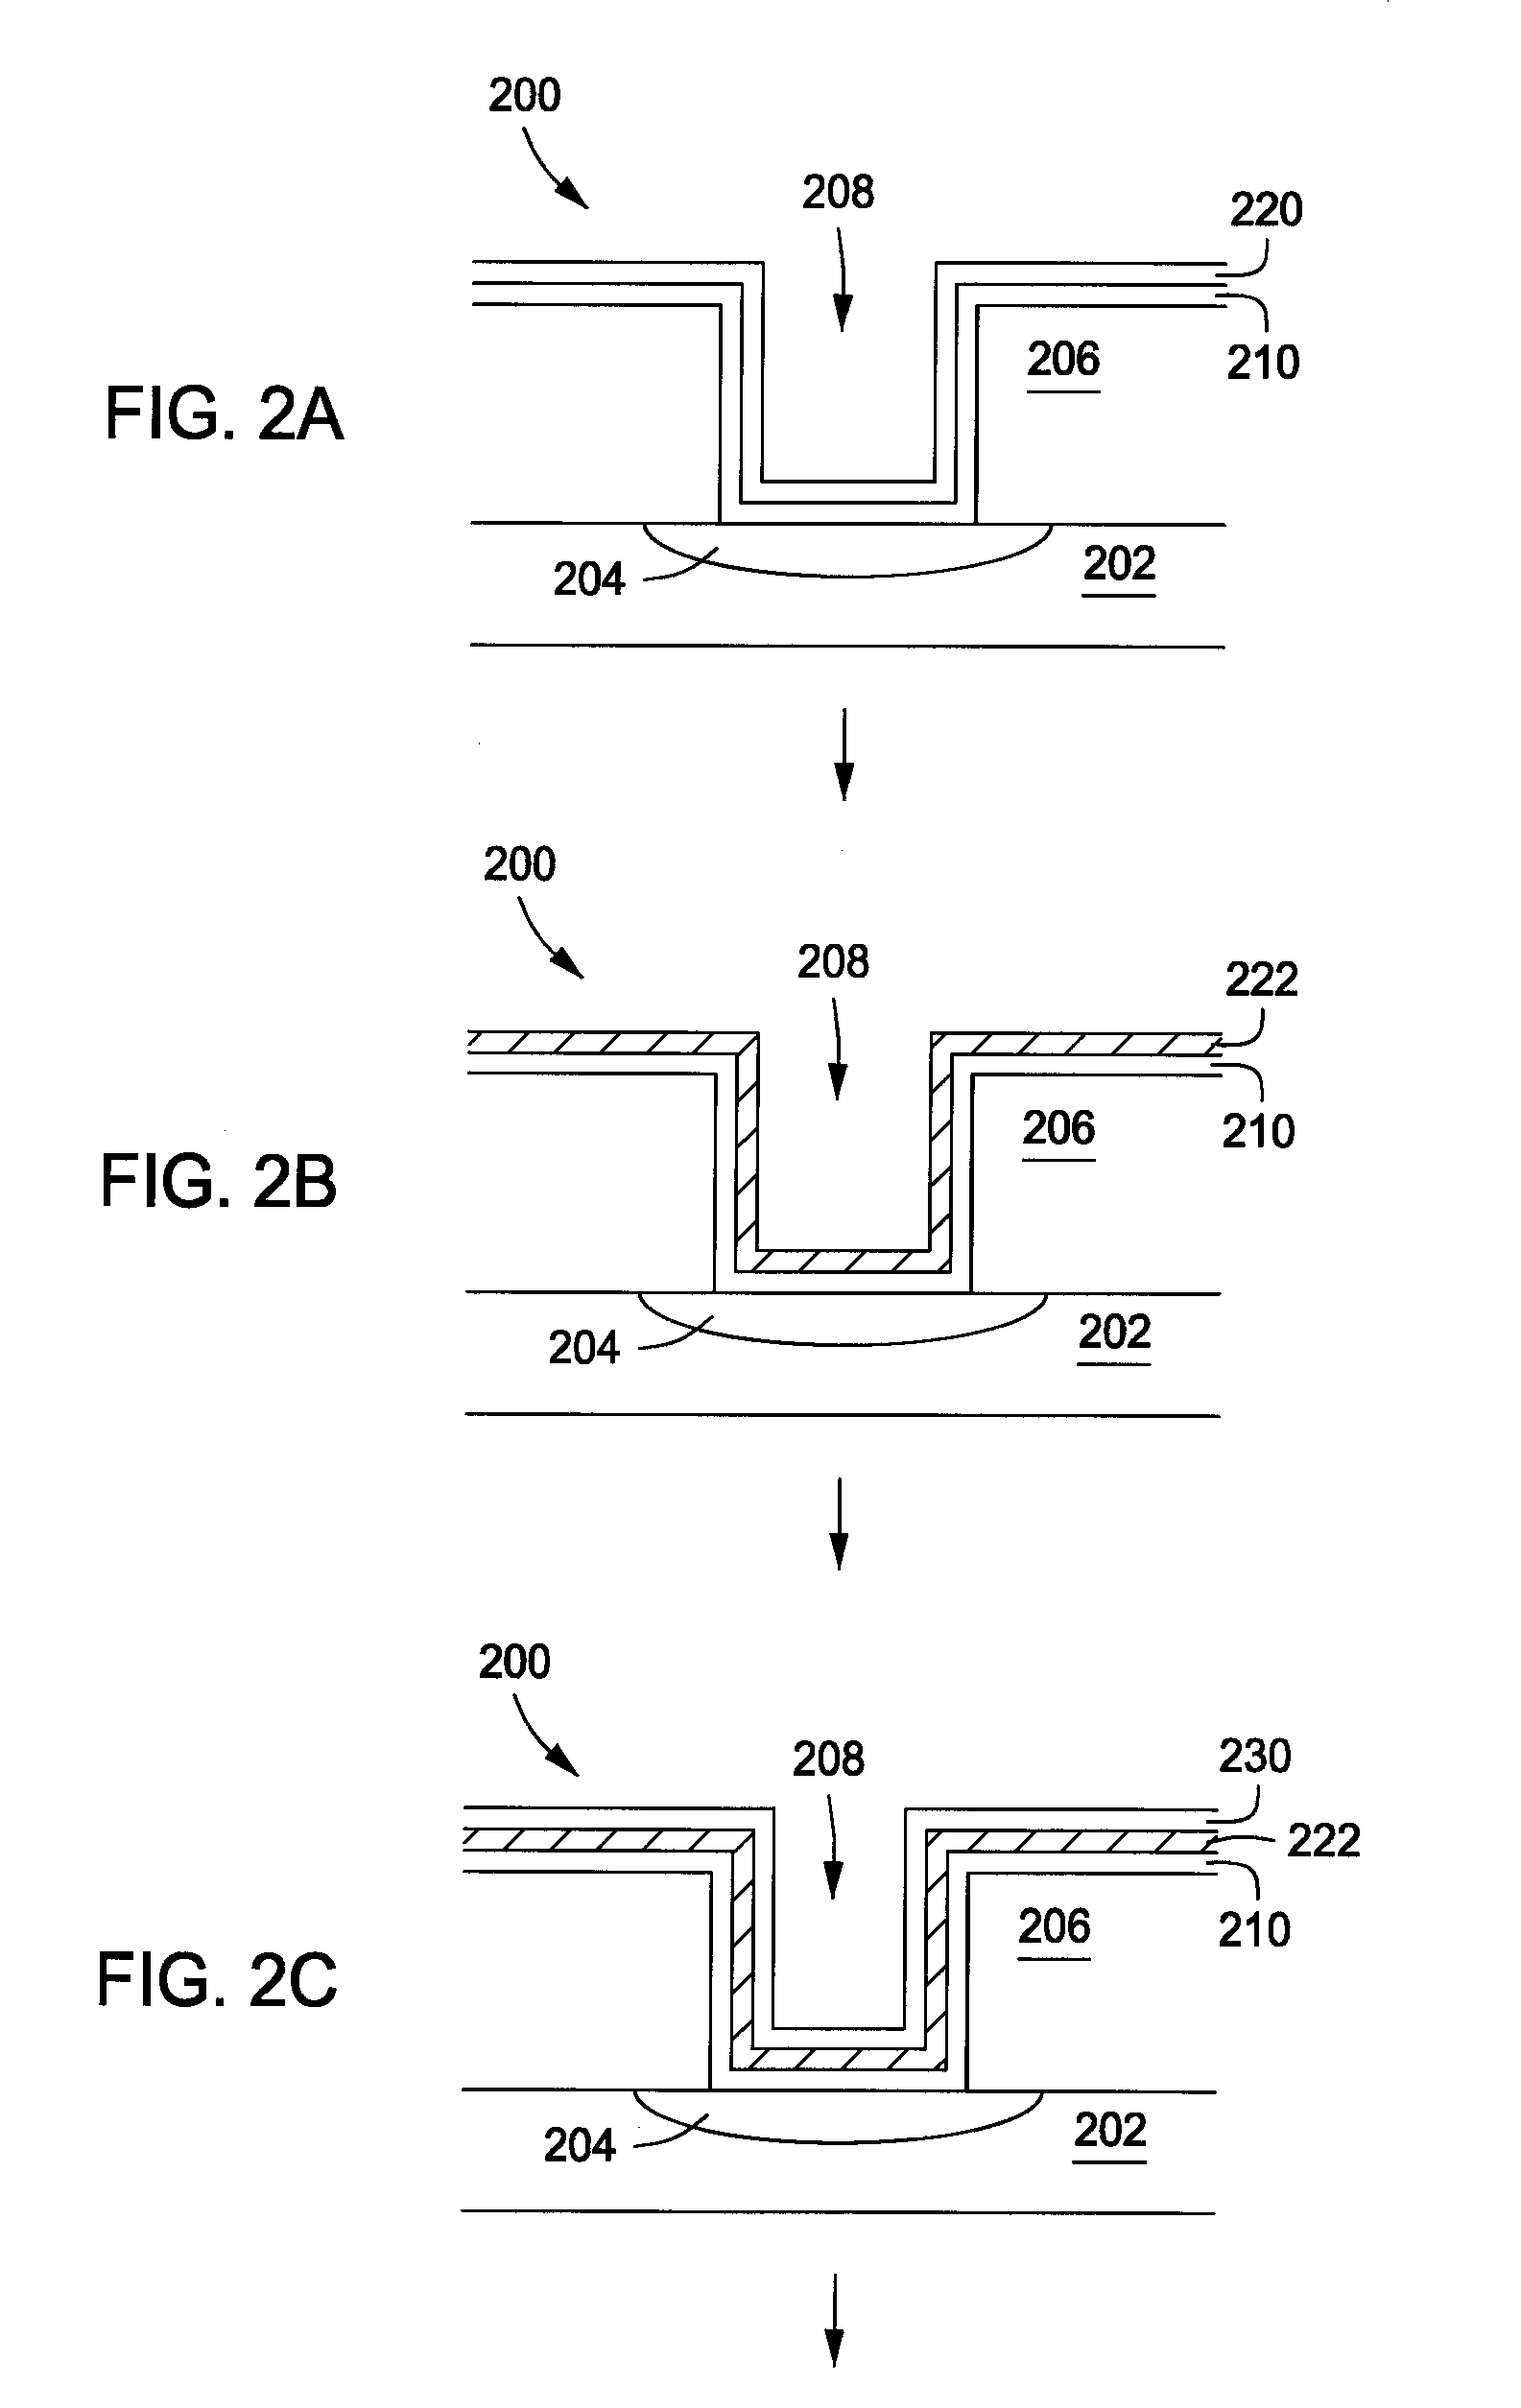 Deposition and densification process for titanium nitride barrier layers